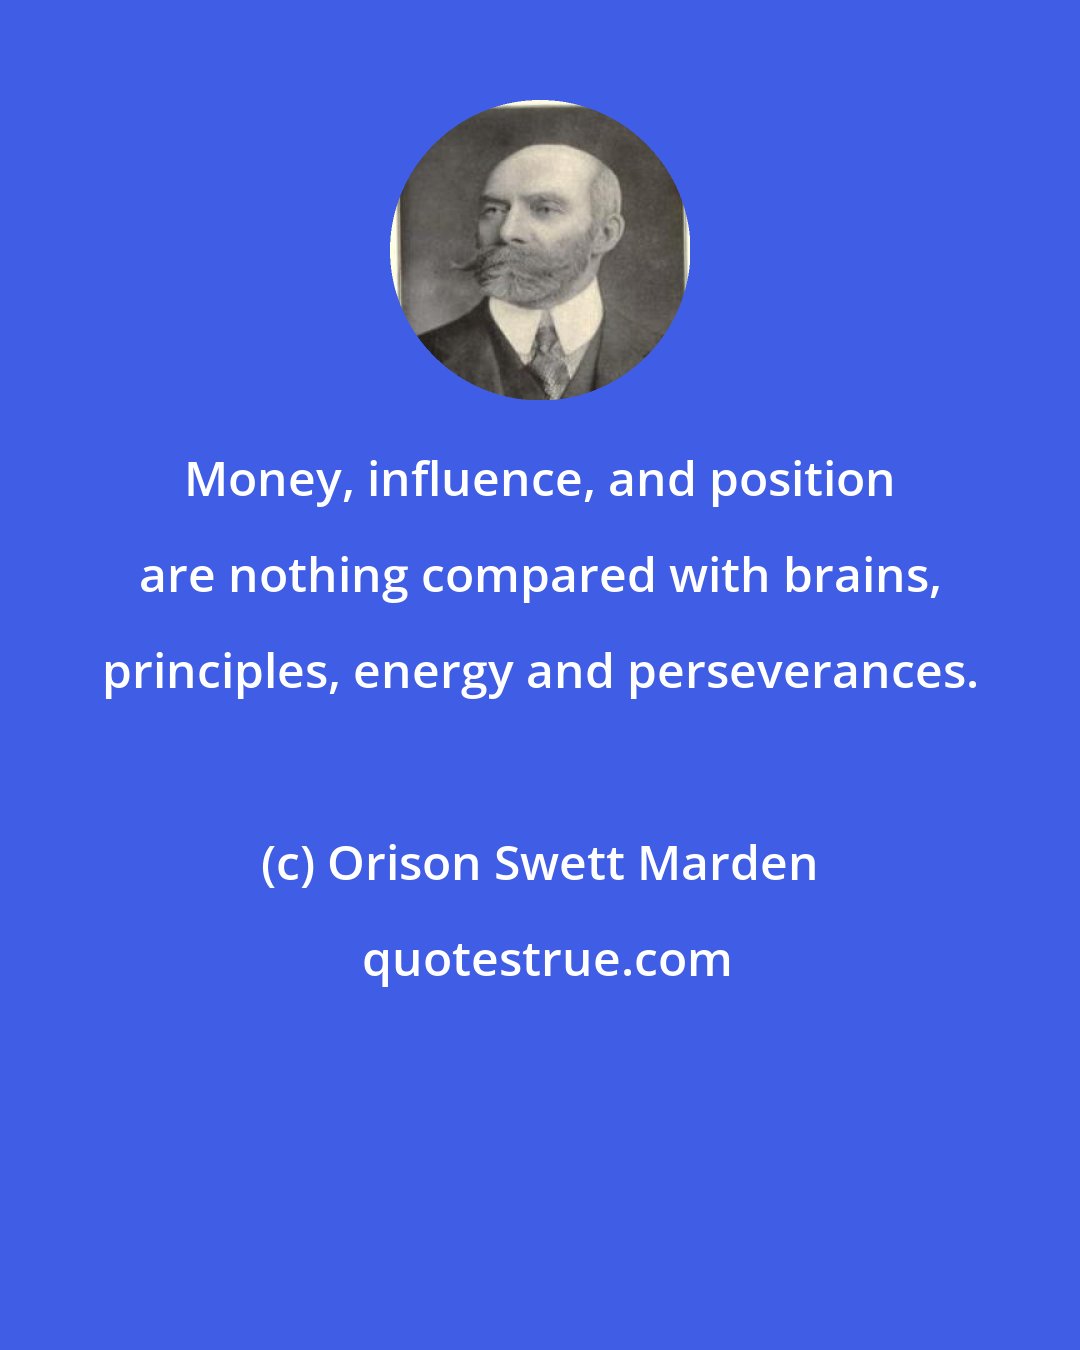 Orison Swett Marden: Money, influence, and position are nothing compared with brains, principles, energy and perseverances.